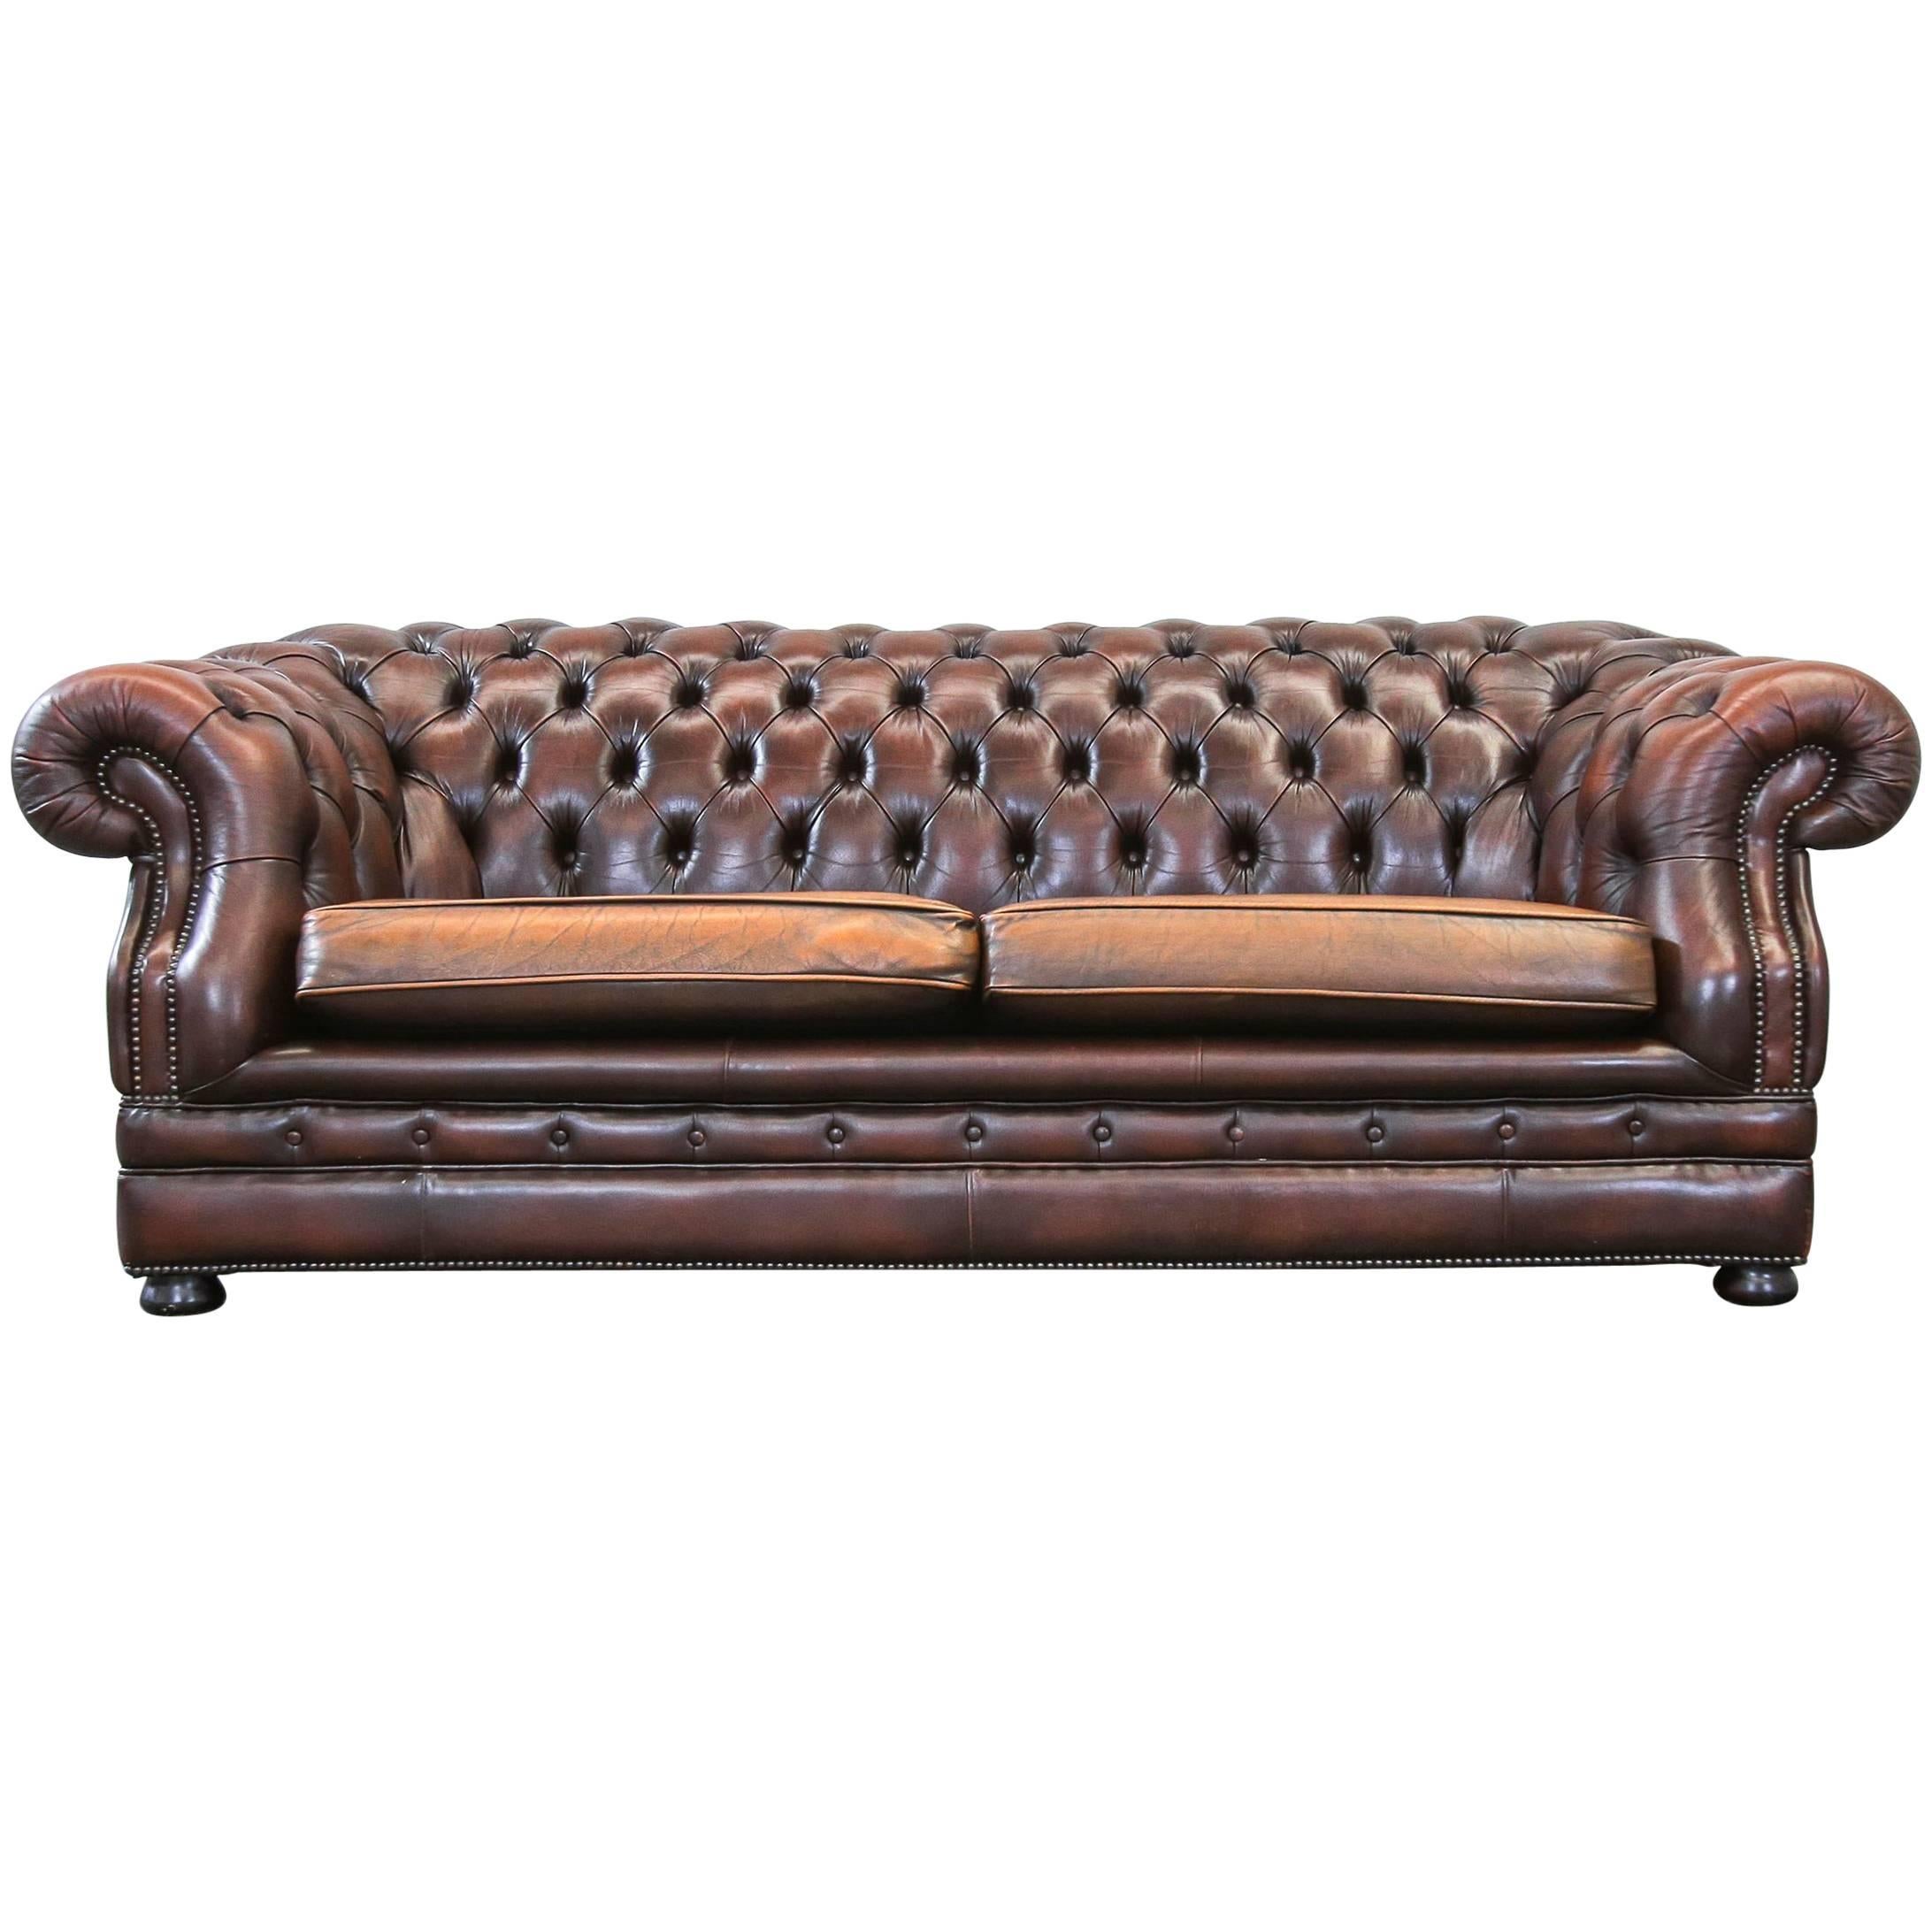 Chesterfield Leather Sofa Brown Three-Seat Couch Retro Vintage For Sale